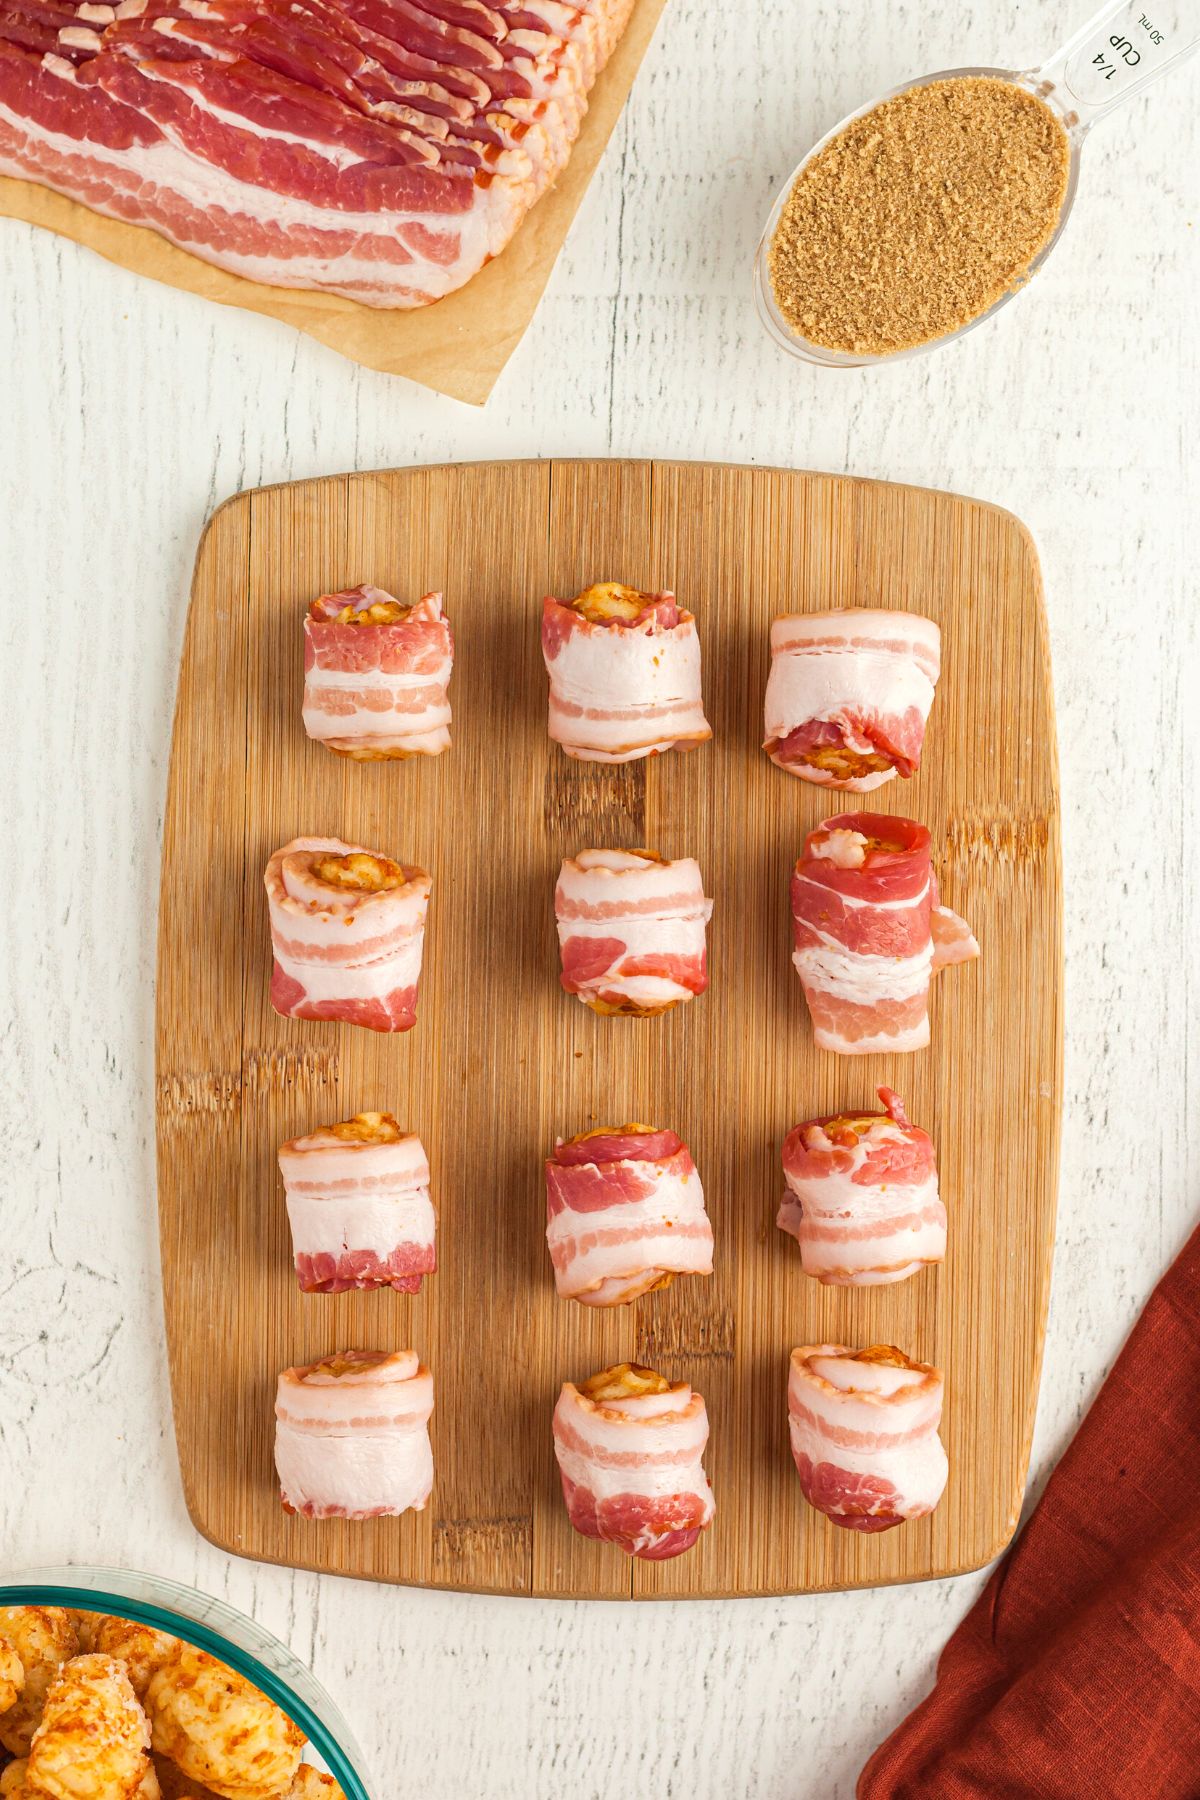 Tater tots wrapped in slices of bacon on a wooden cutting board